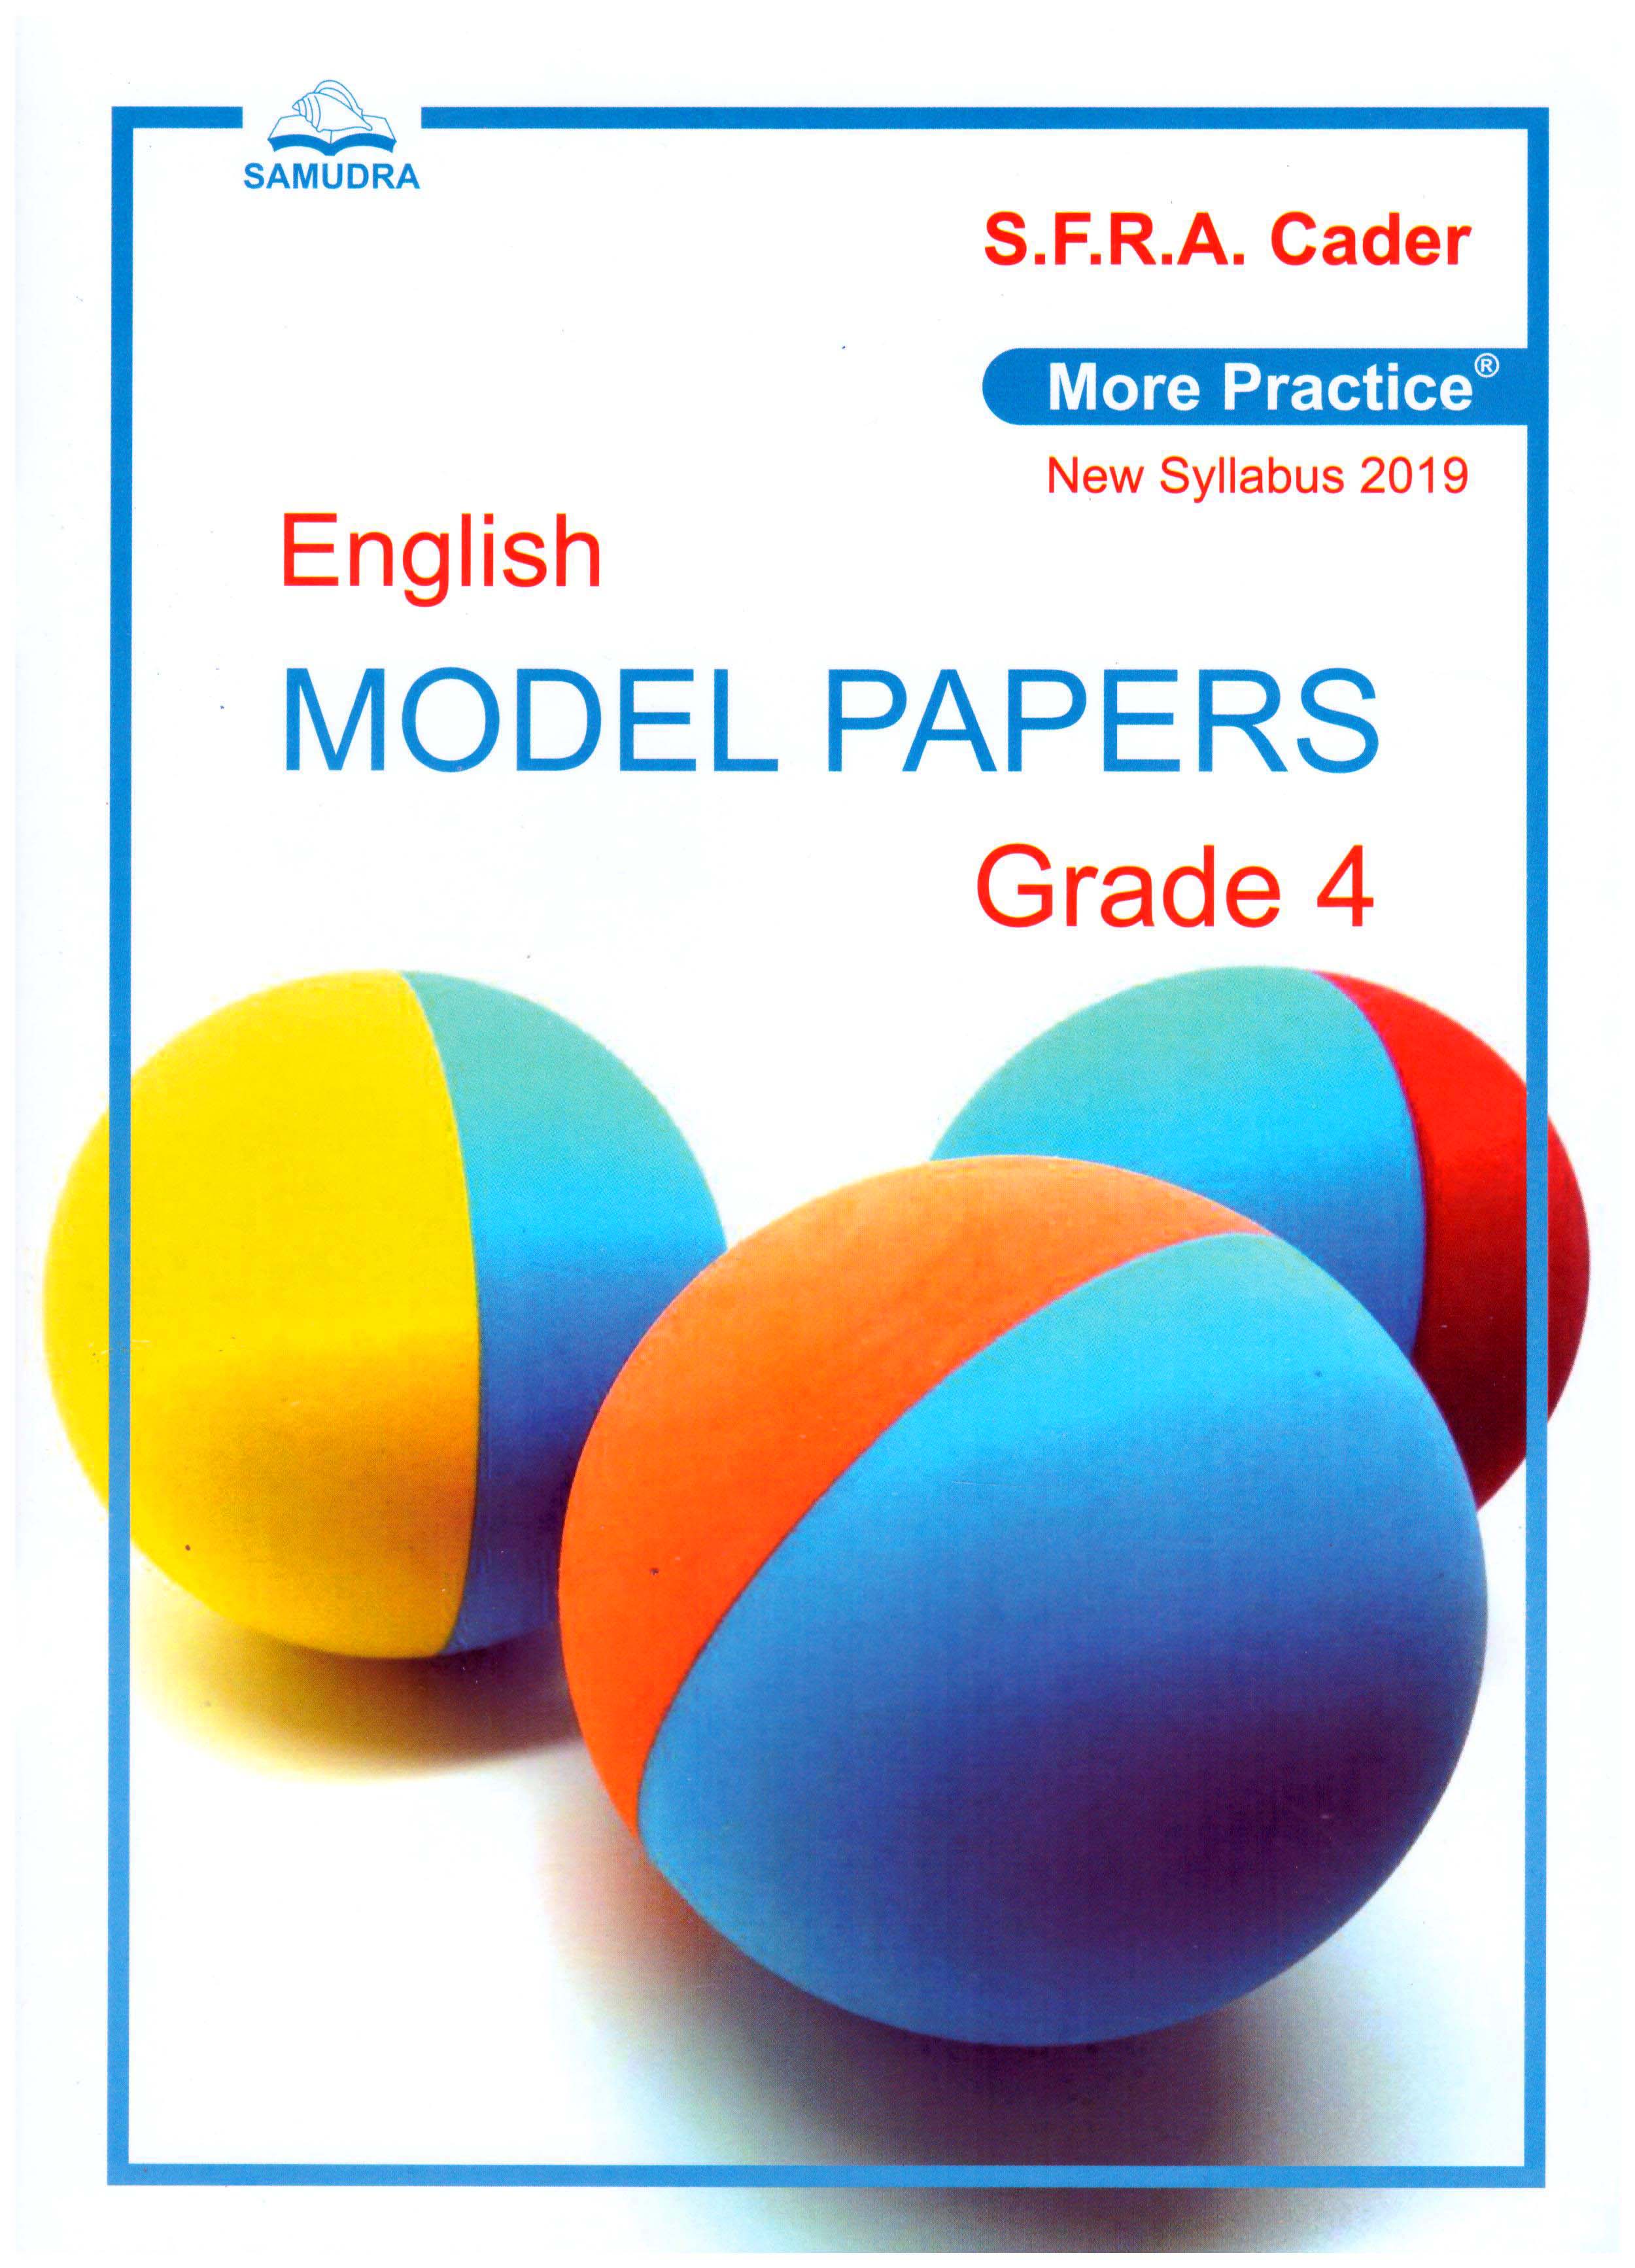 More Practice English Model Papers Grade 4 ( New Syllabus 2019 )